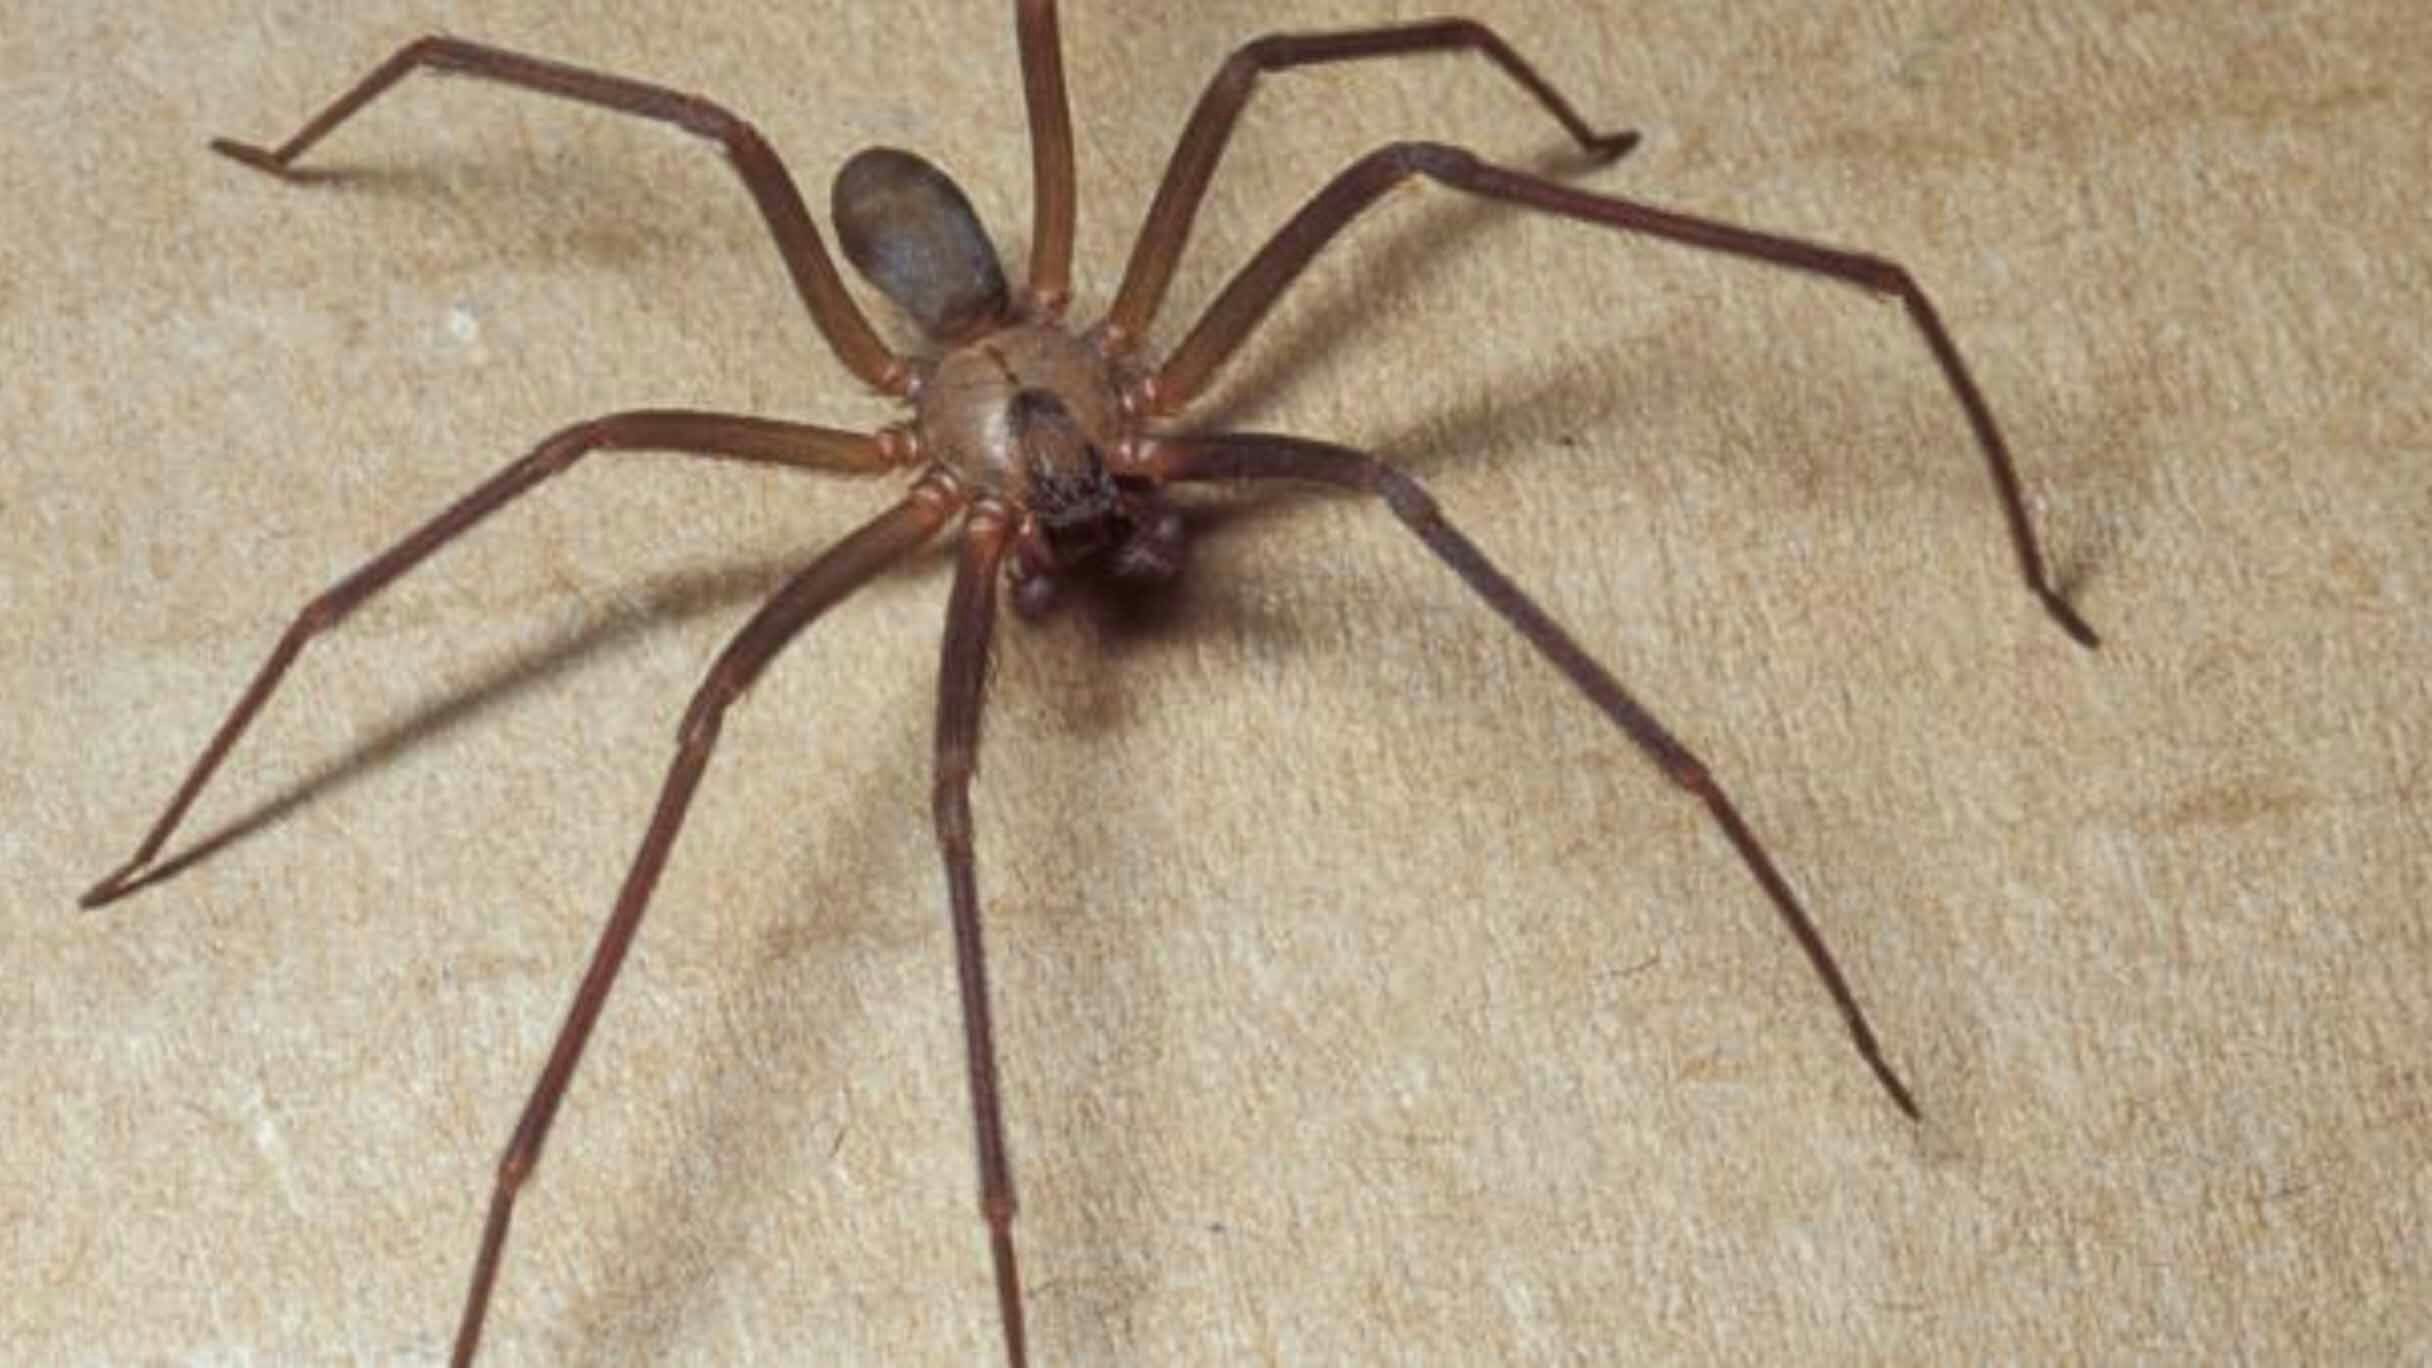 Brown recluse 5 17 23